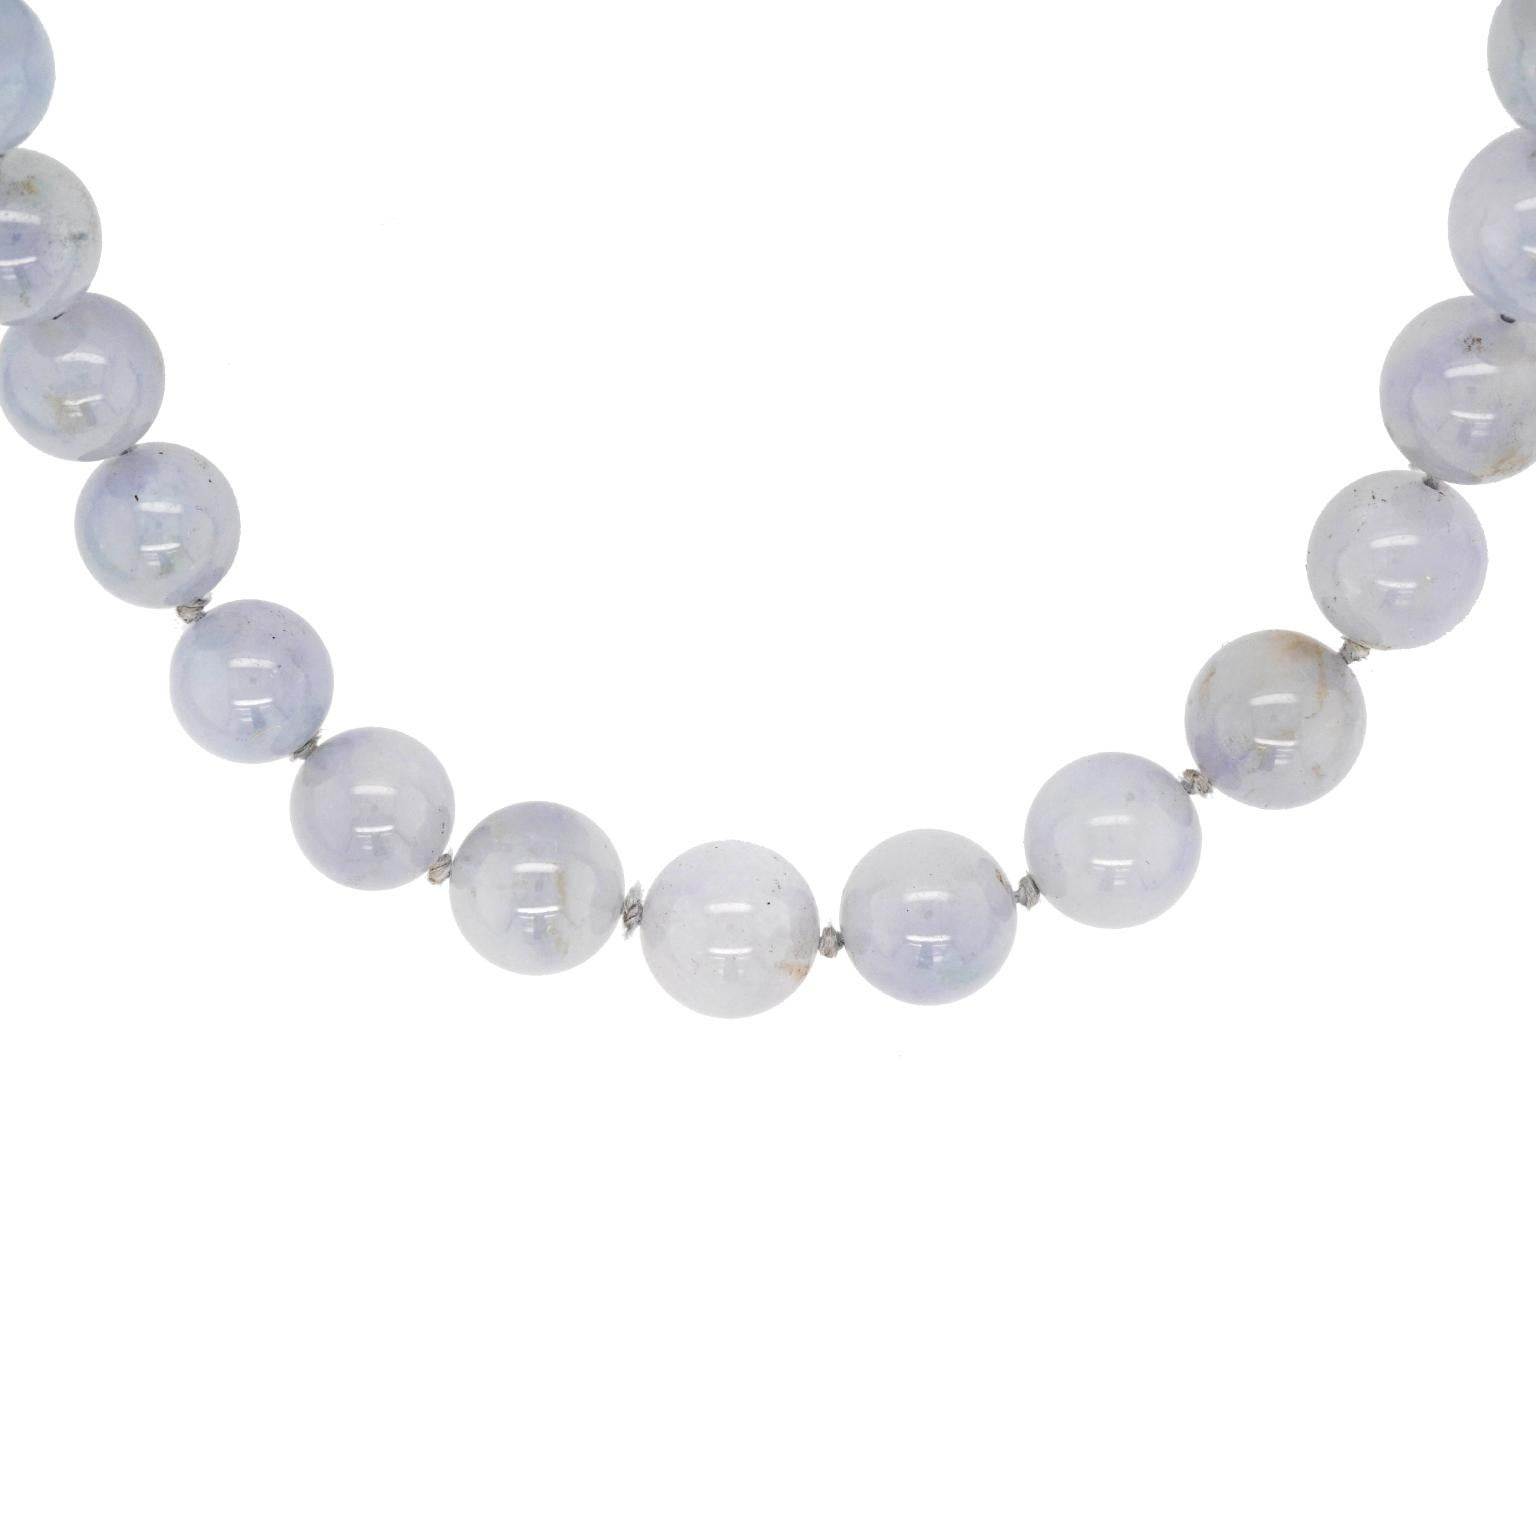 Circa 1970s, 14k, by Gump's, San Francisco.    This elegant strand of jade beads is a delicate lavender color. Part of the famous Gump's east meets west narrative, the look is classic San Francisco cool, understated elegance. Excellent